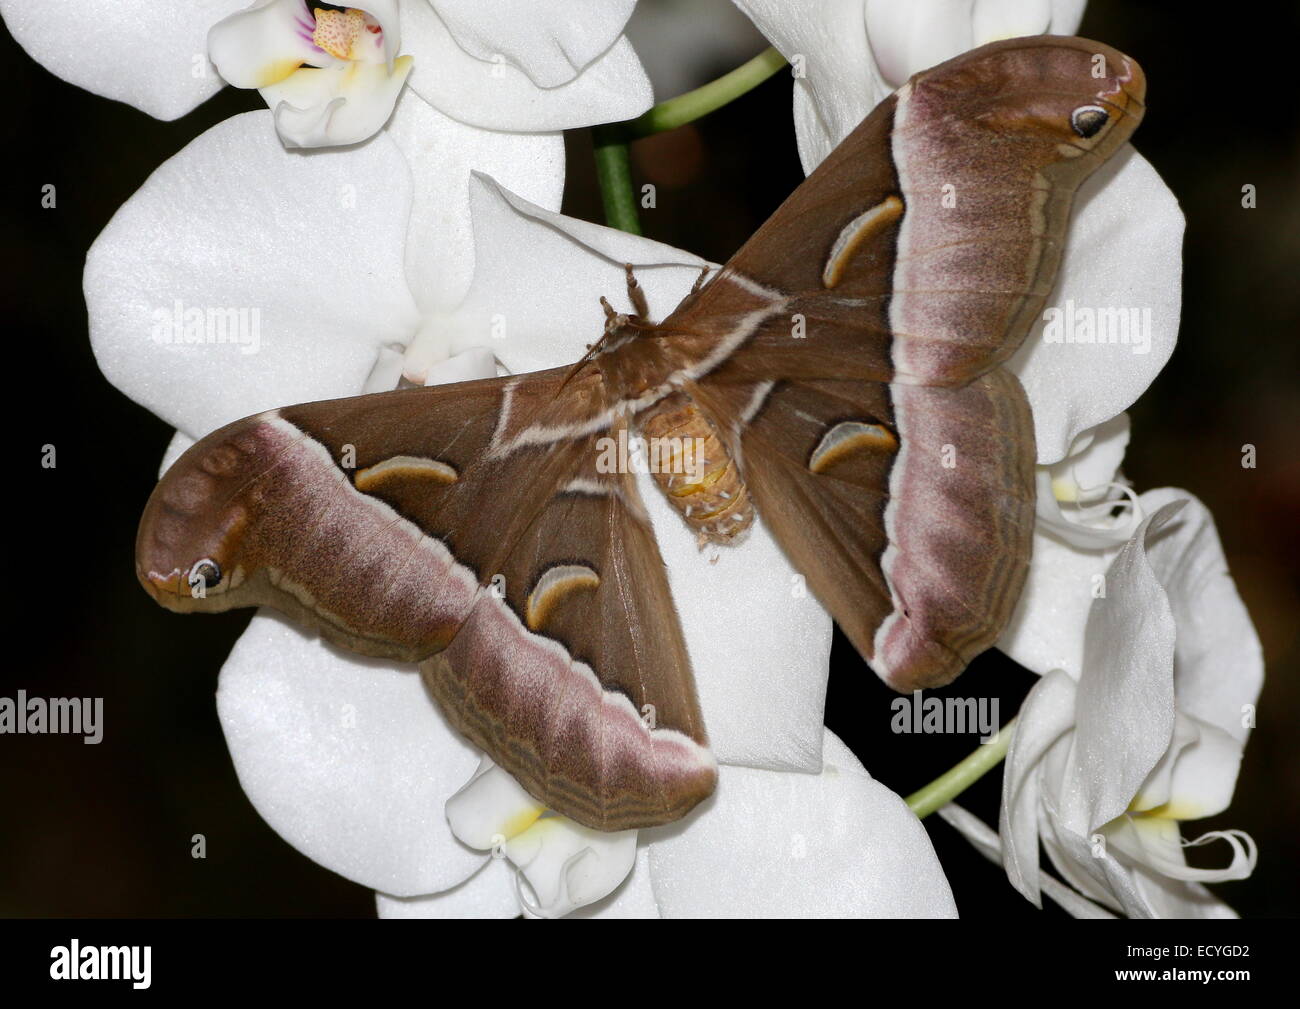 Close-up of a Giant Asian Silanthus Silkmoth or  Eri silkmoth ( Samia cynthia) on a tropical white orchid flower Stock Photo